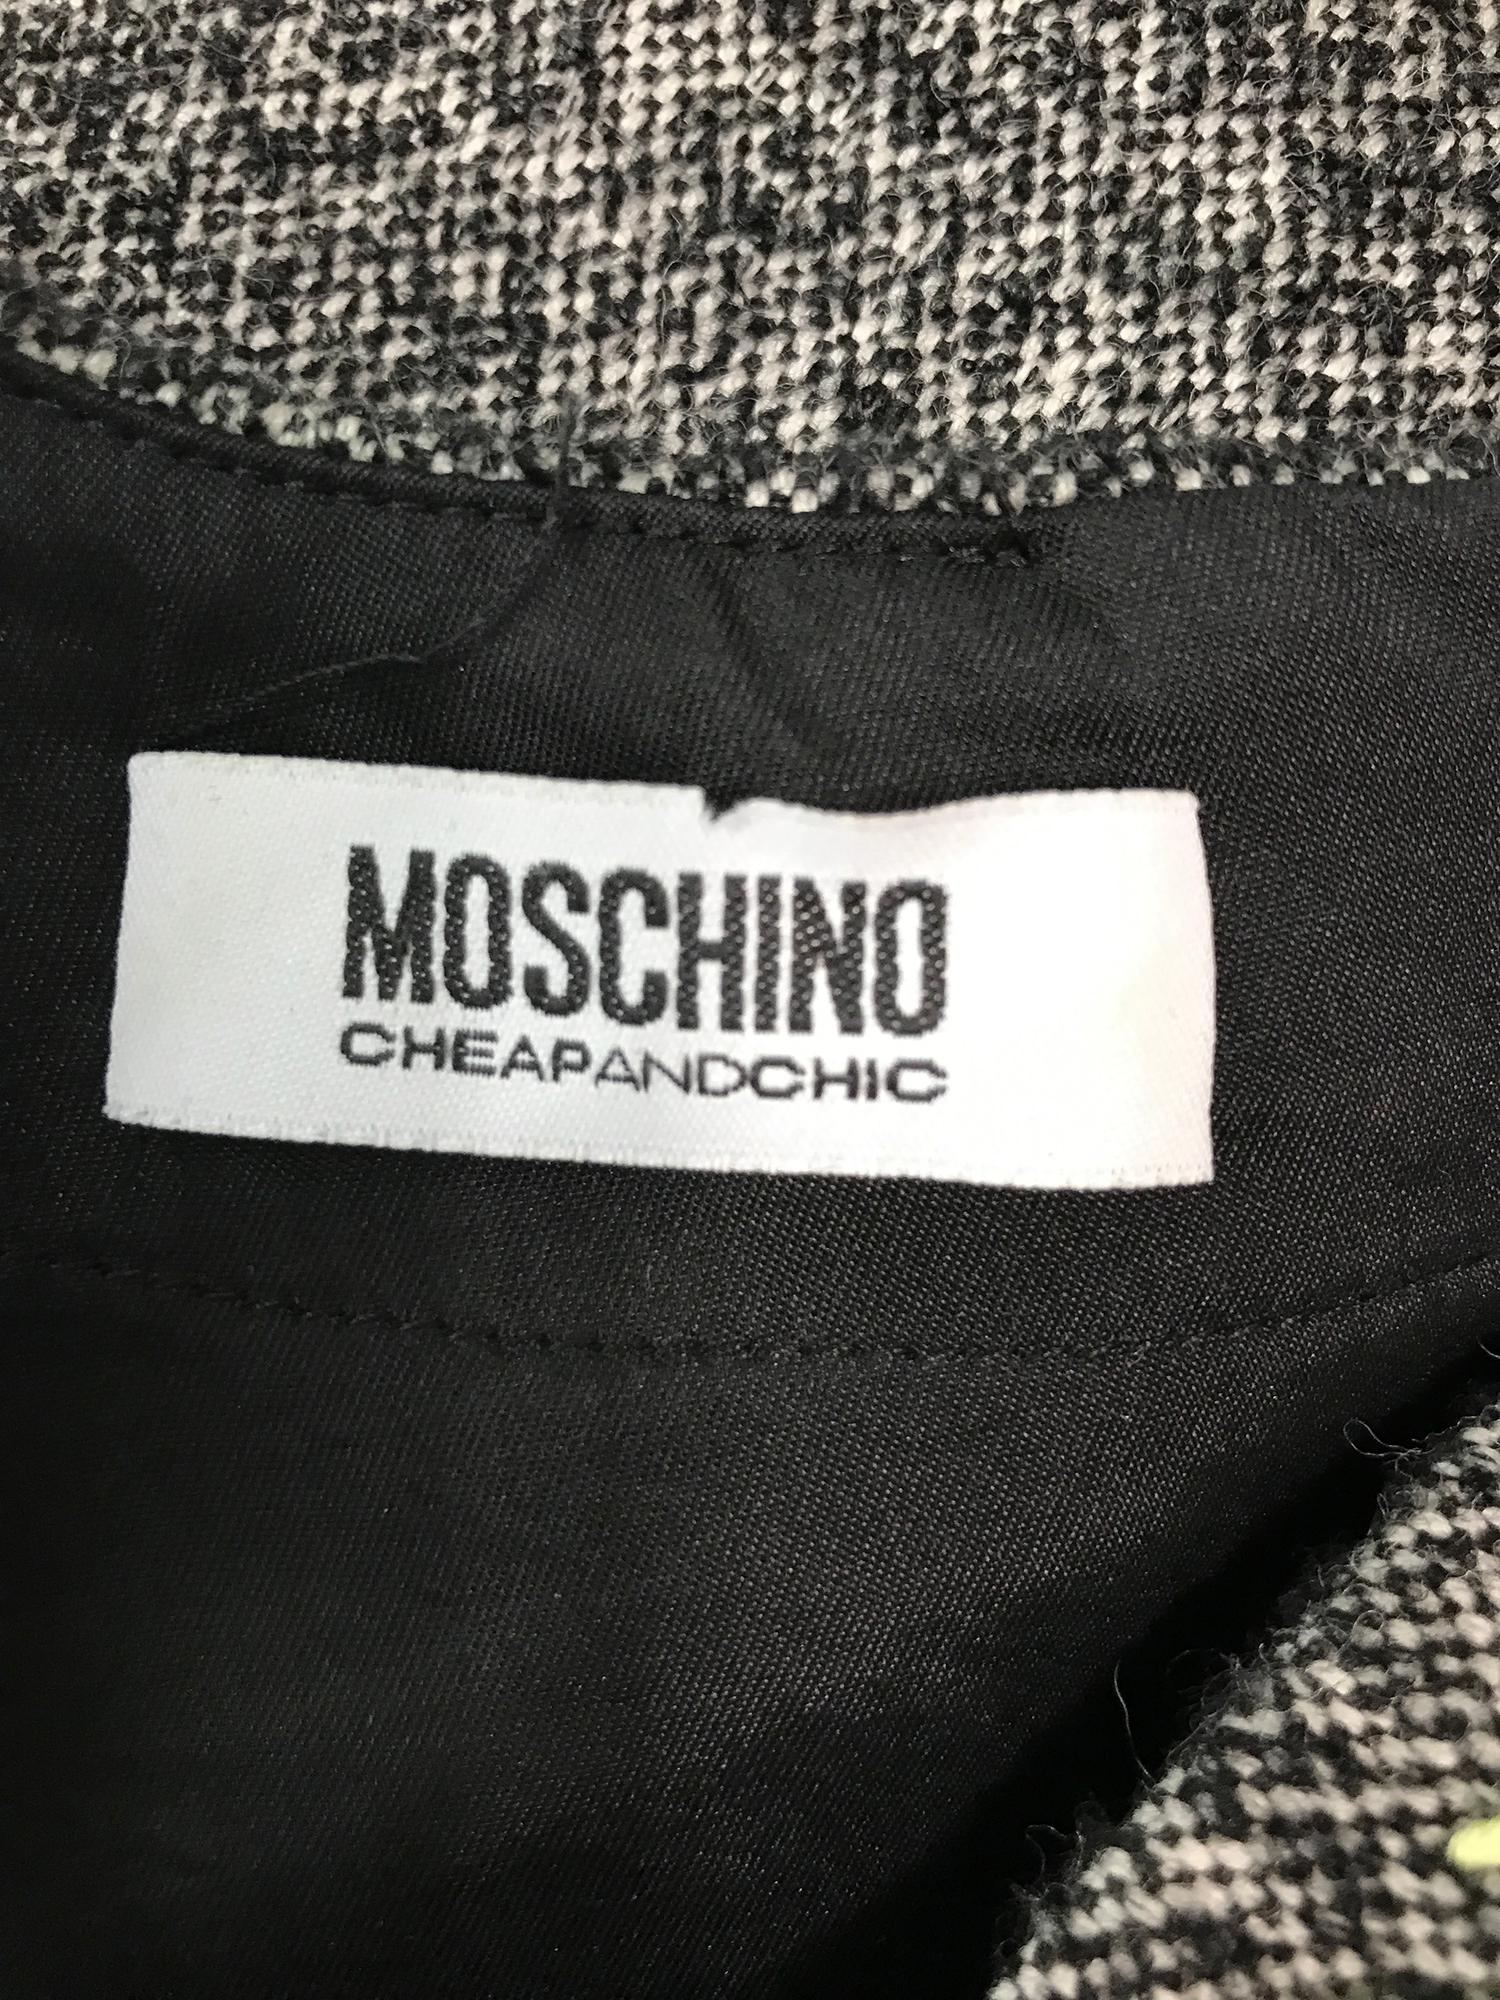 Moschino Cheap & Chic Atelier! Tweed Applique Top 7